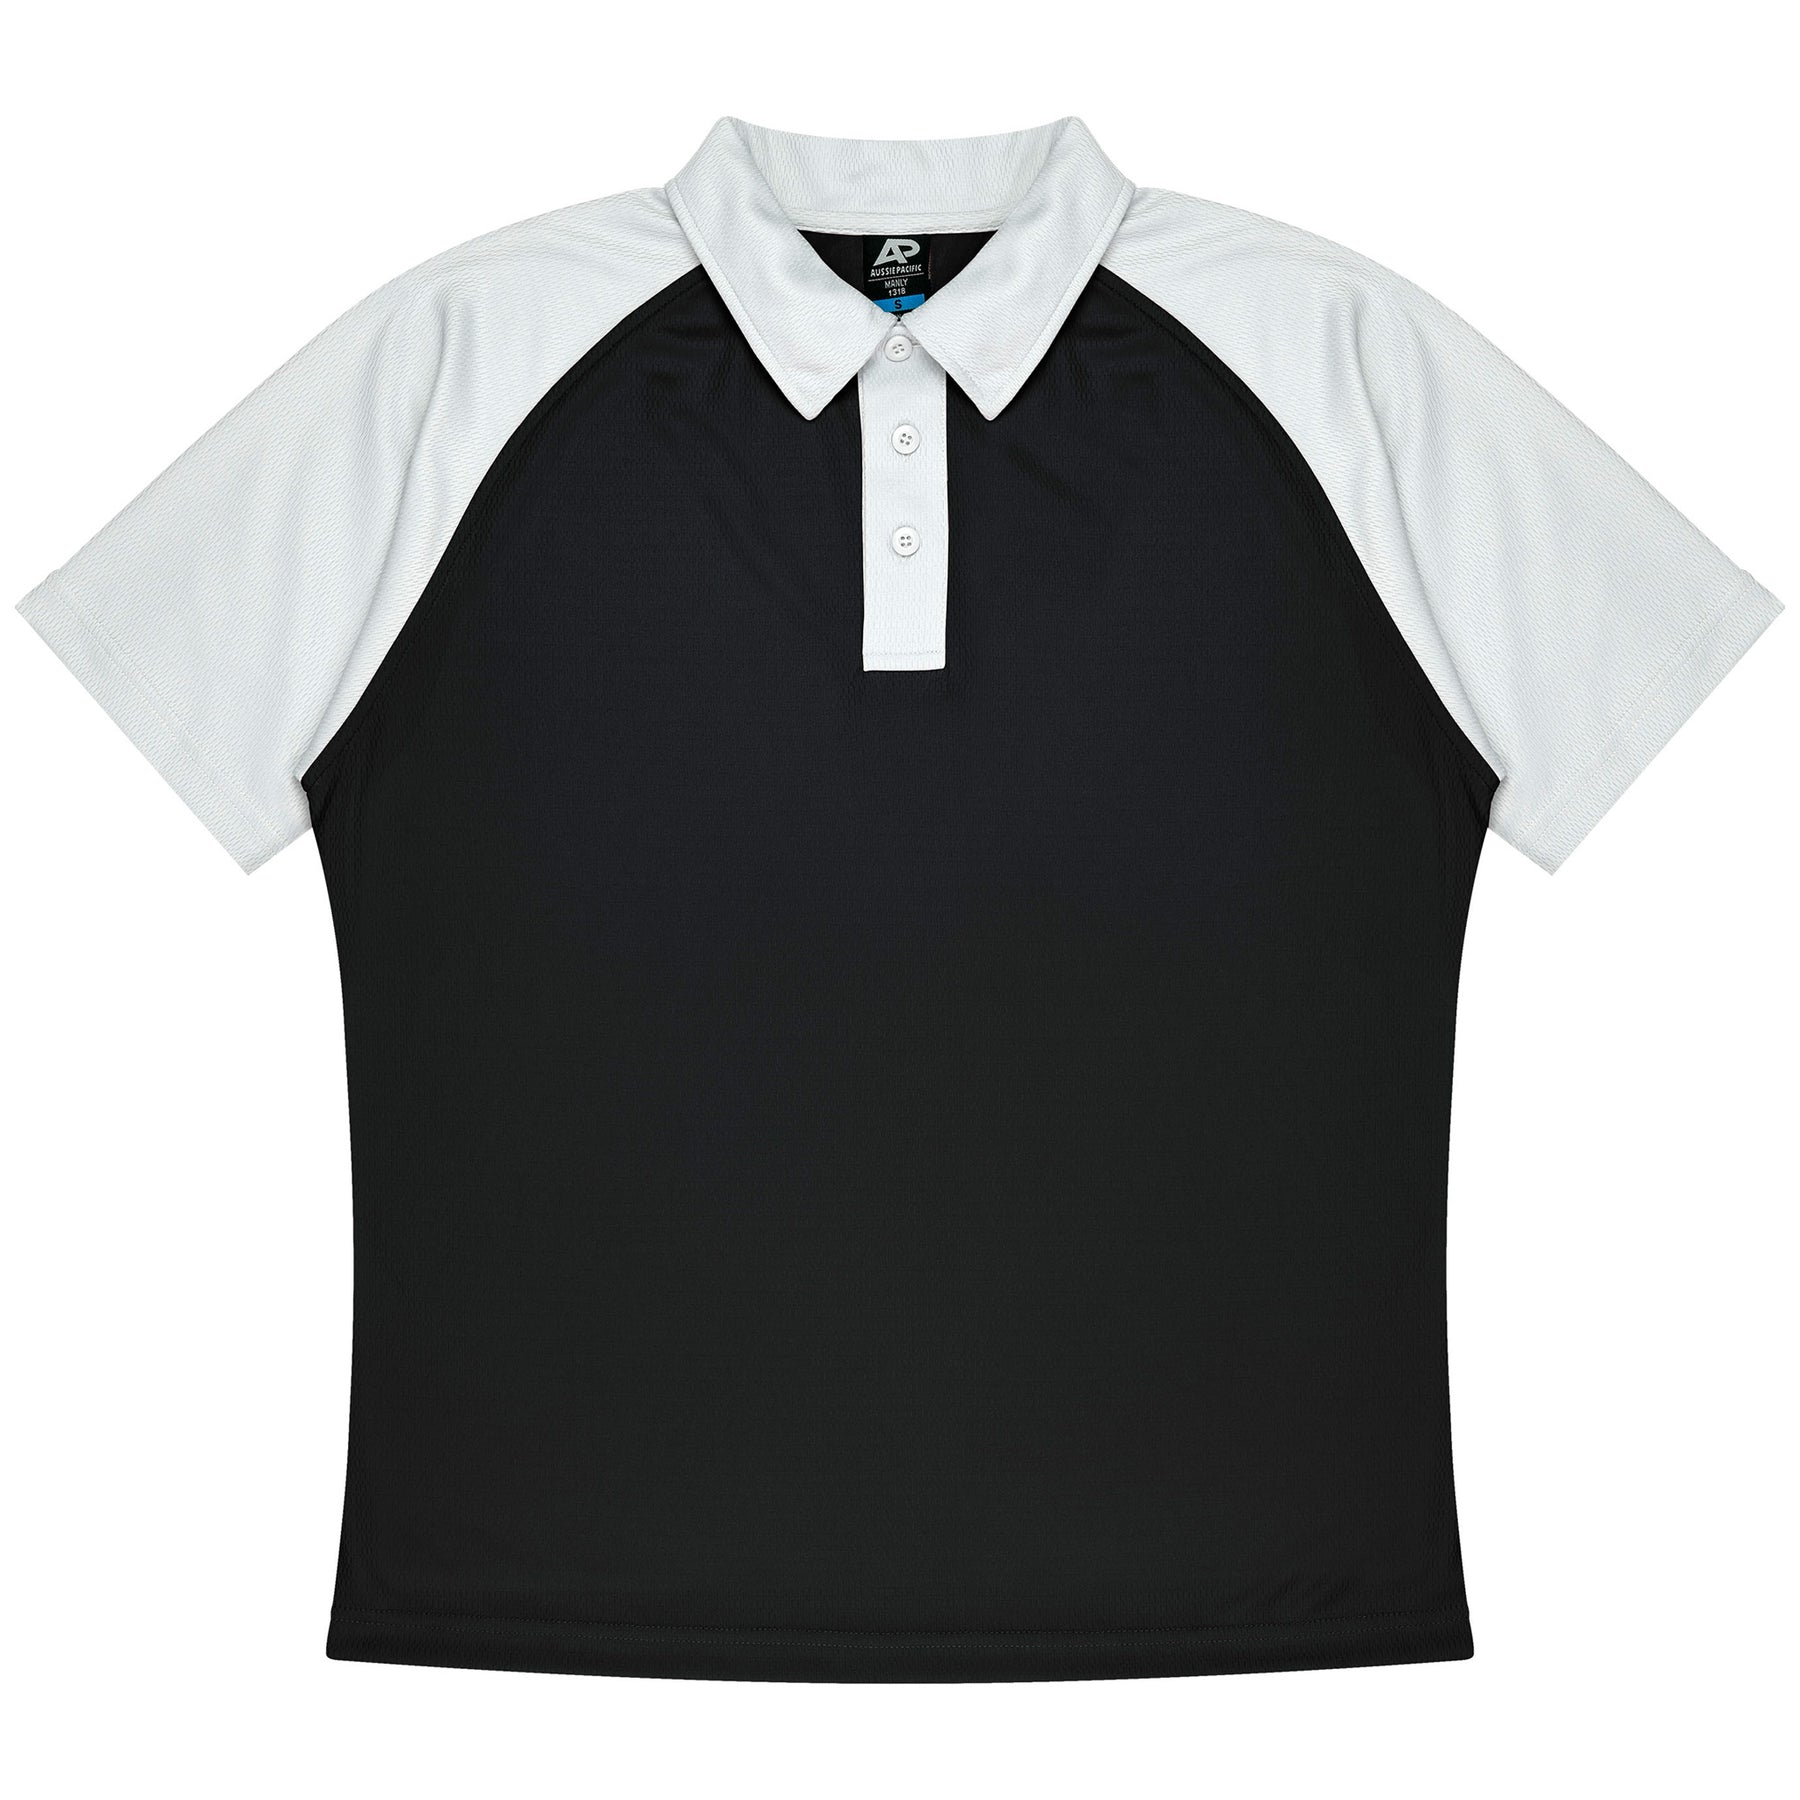 manly kids polo in black white